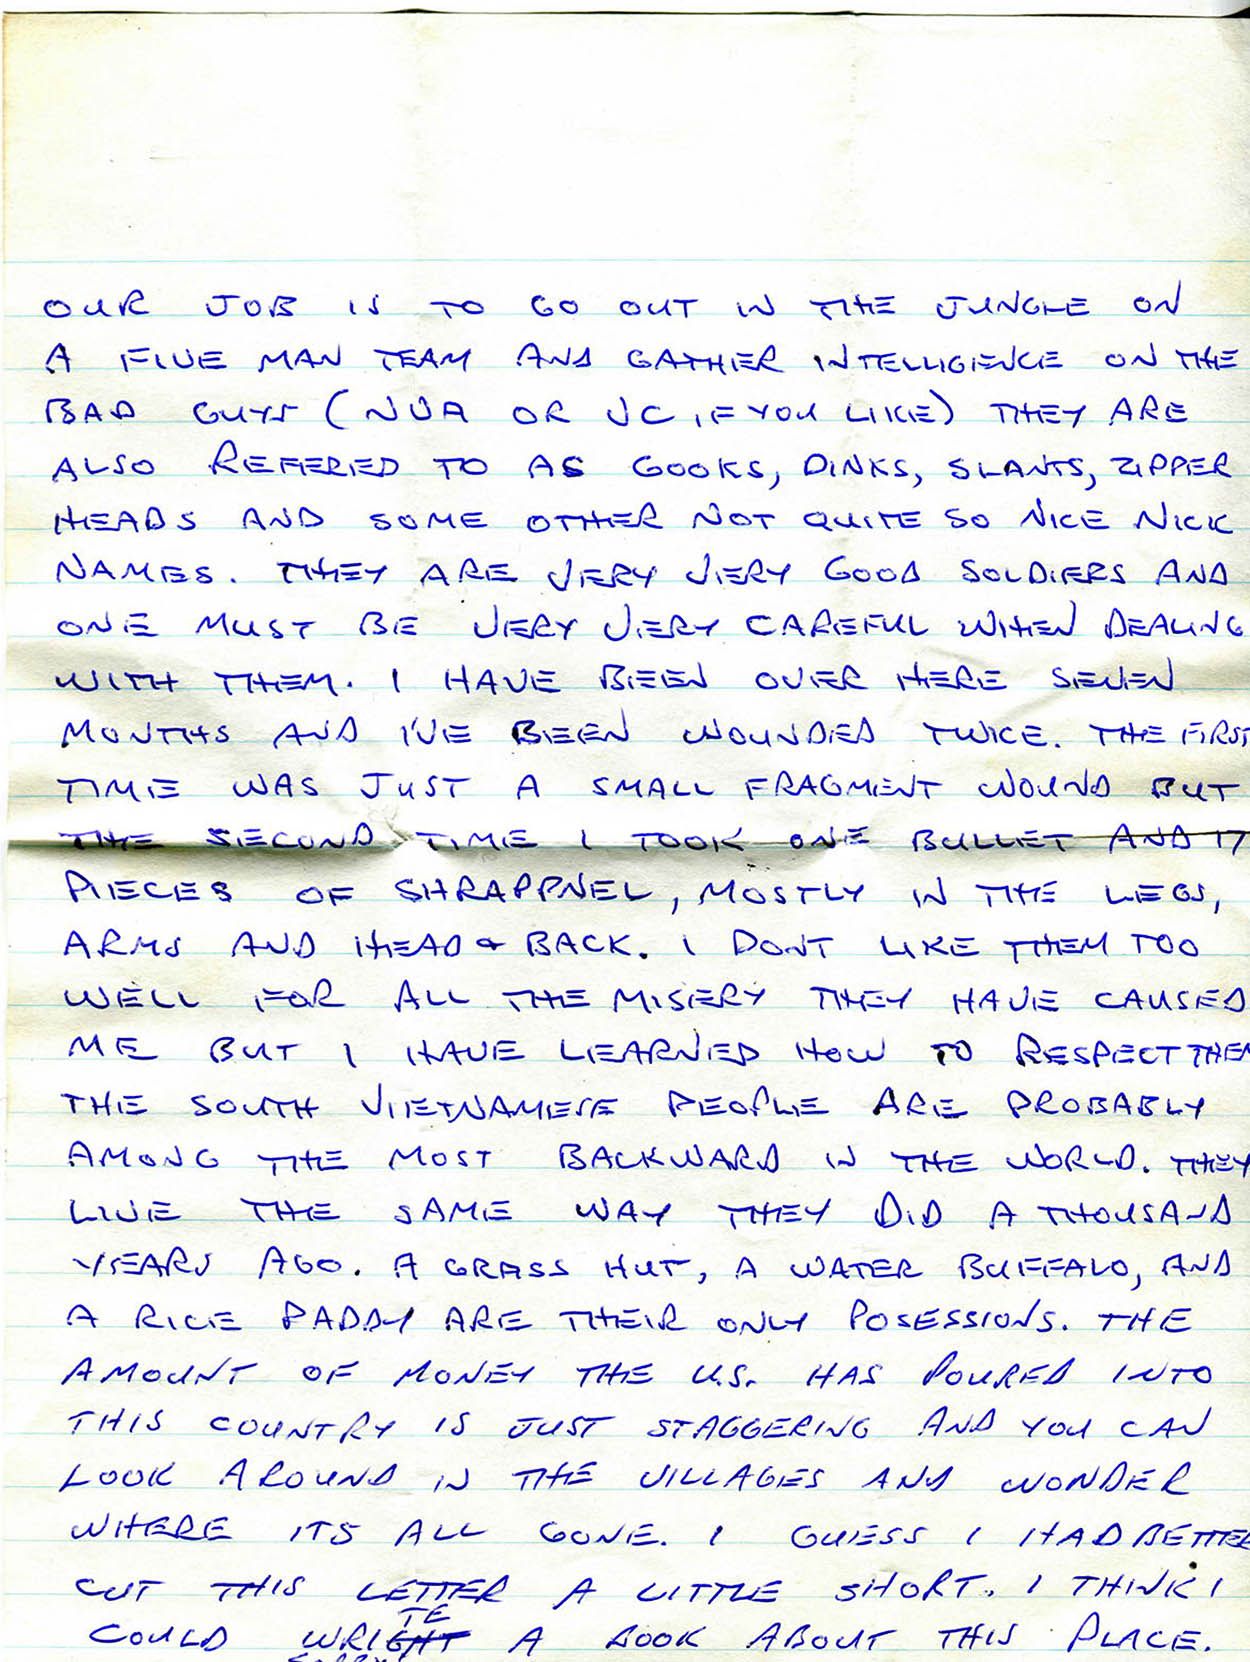 Page 3 of the letter